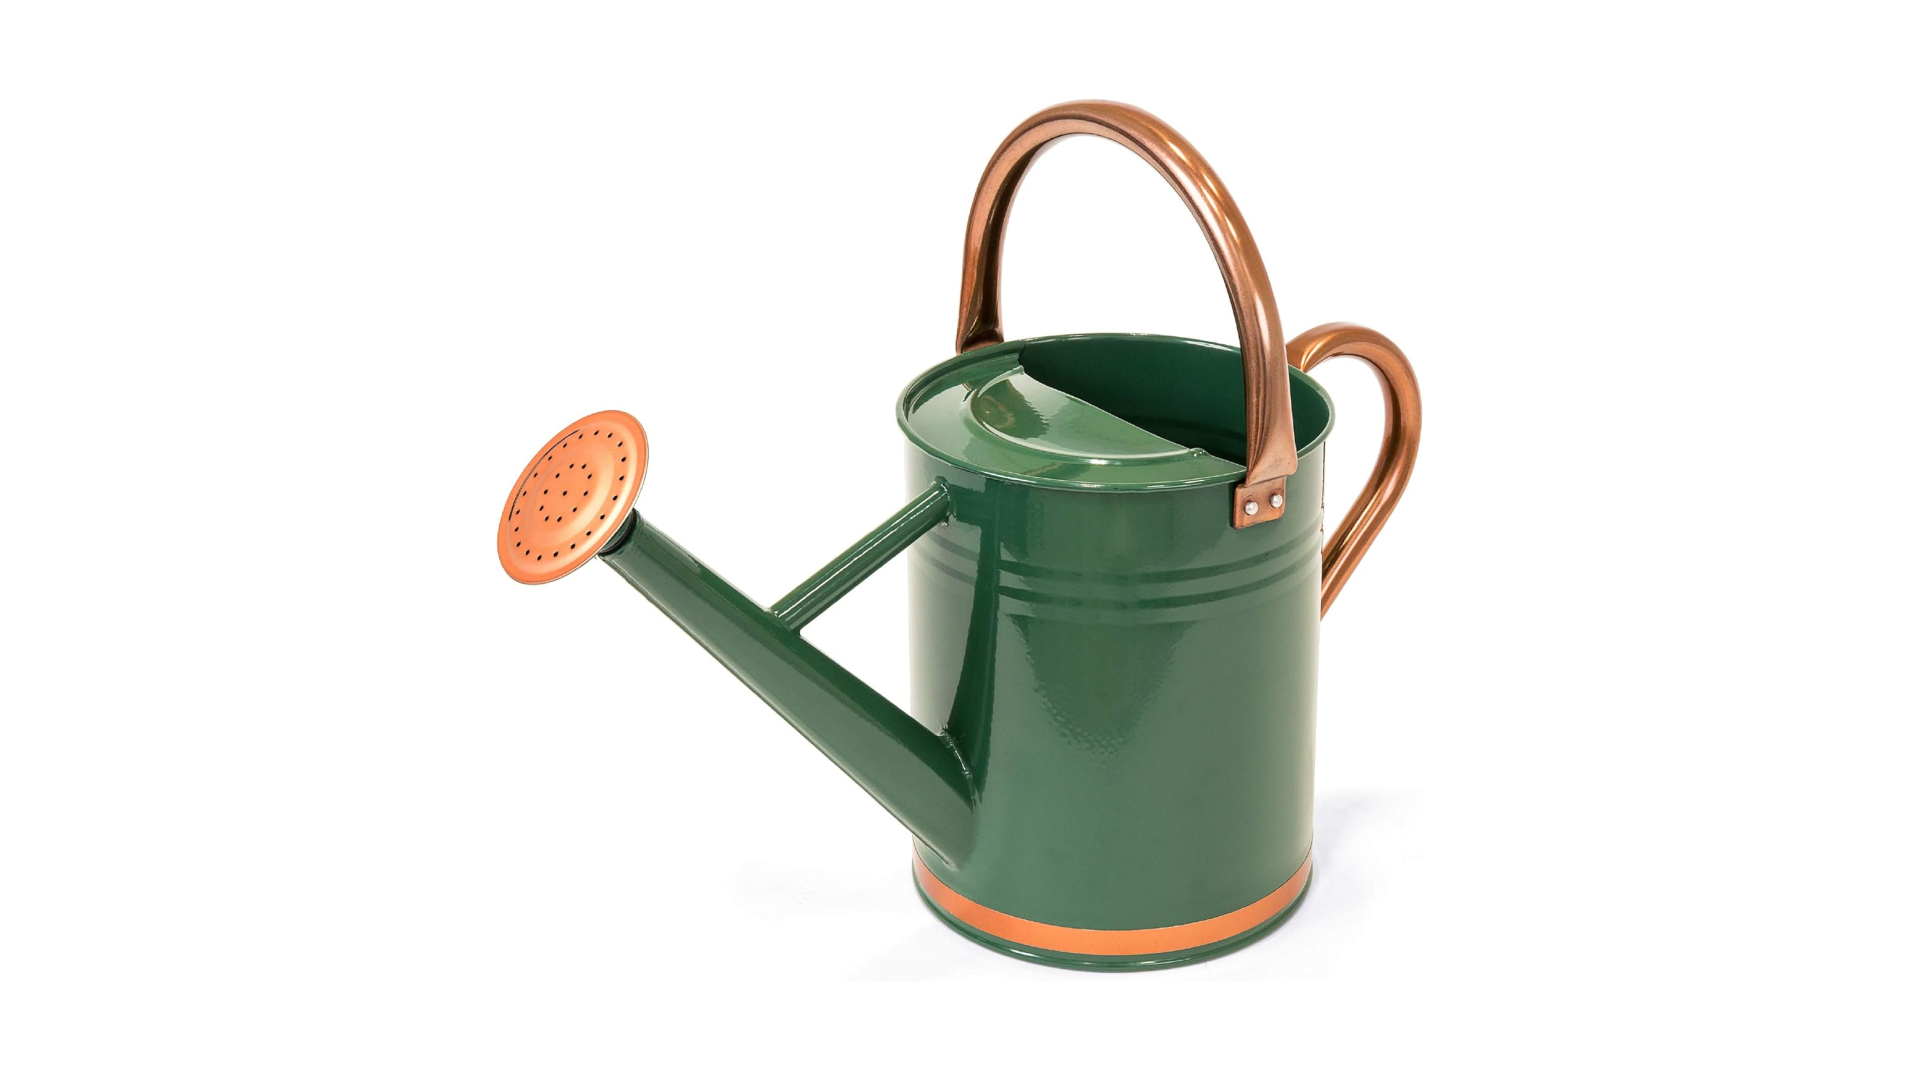 watering-can